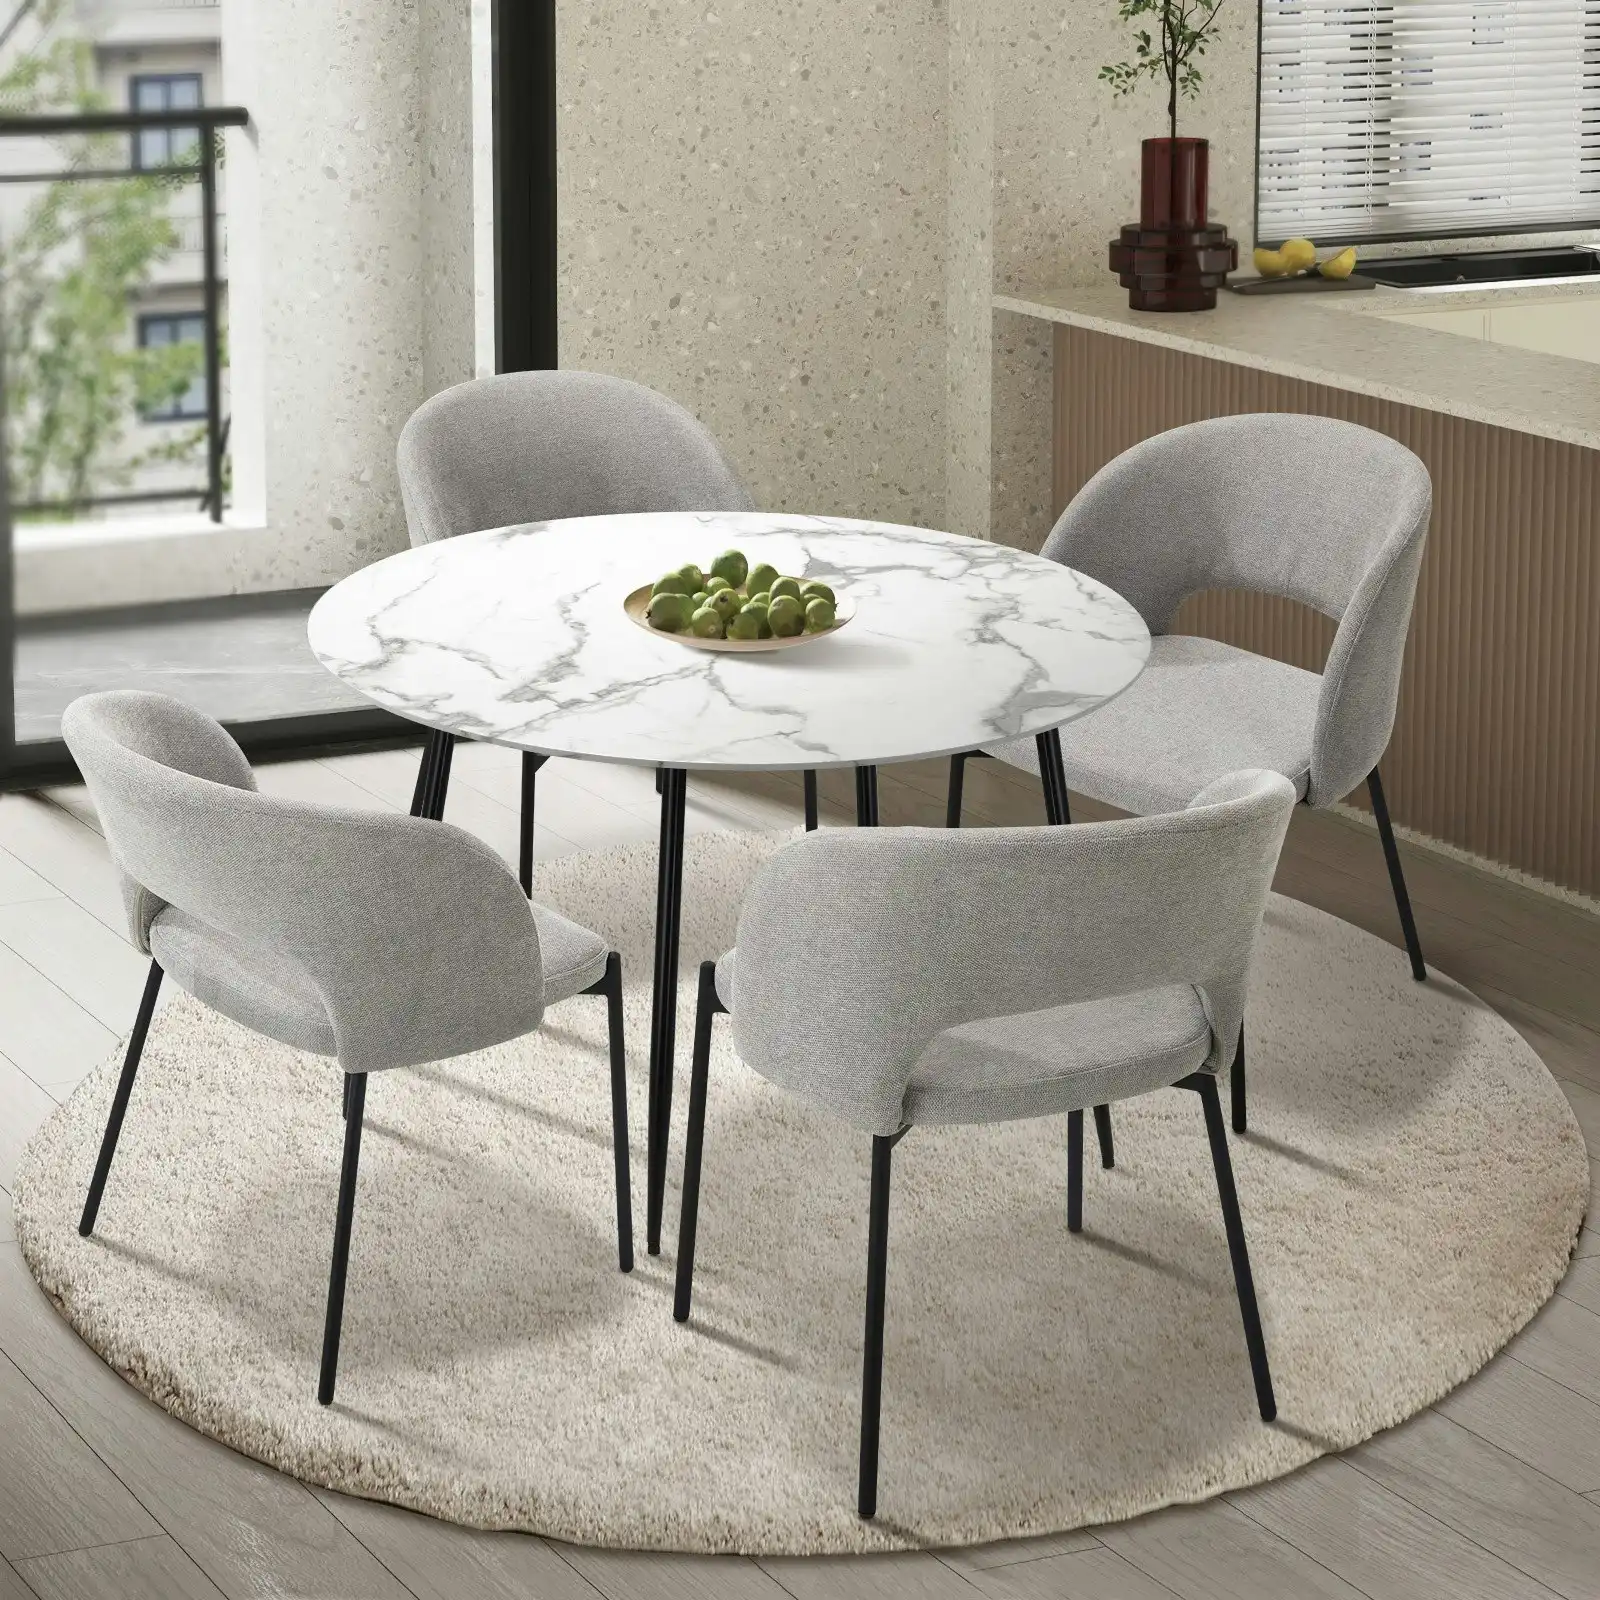 Oikiture 5PCS Dining sets 110cm Round Table with 4PCS Chairs Fabric Grey